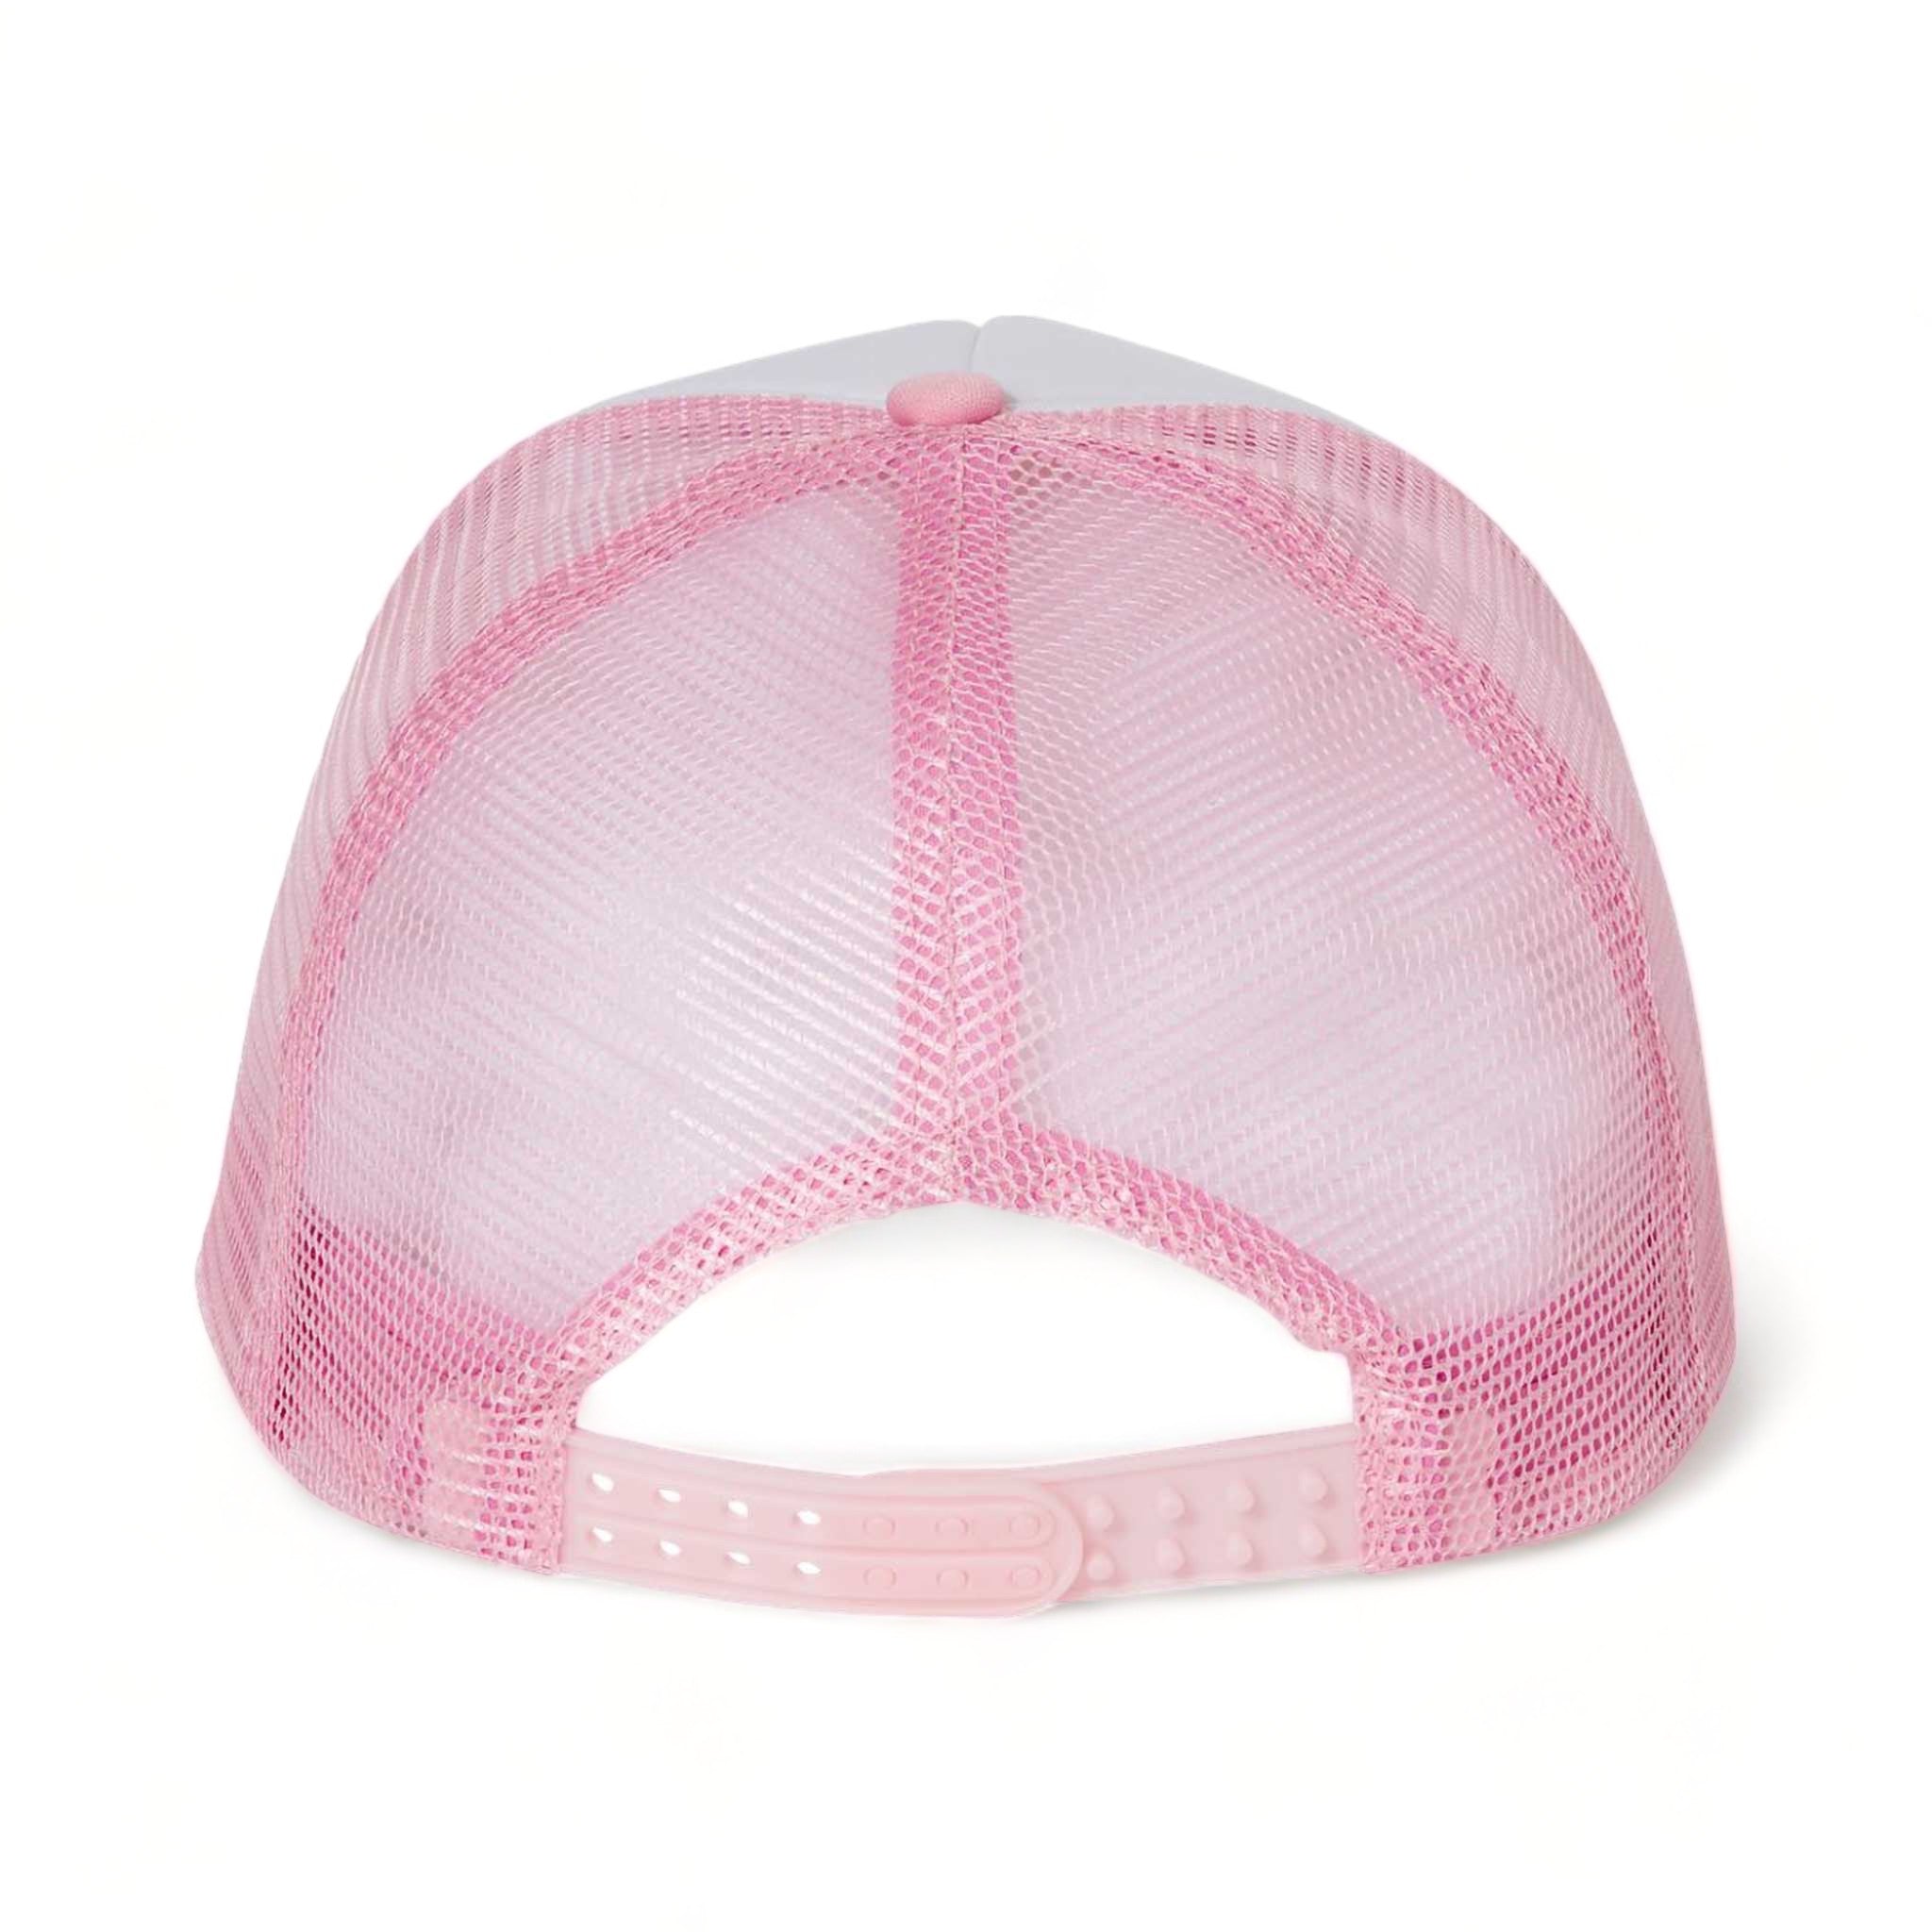 Back view of Valucap VC700 custom hat in white and pink